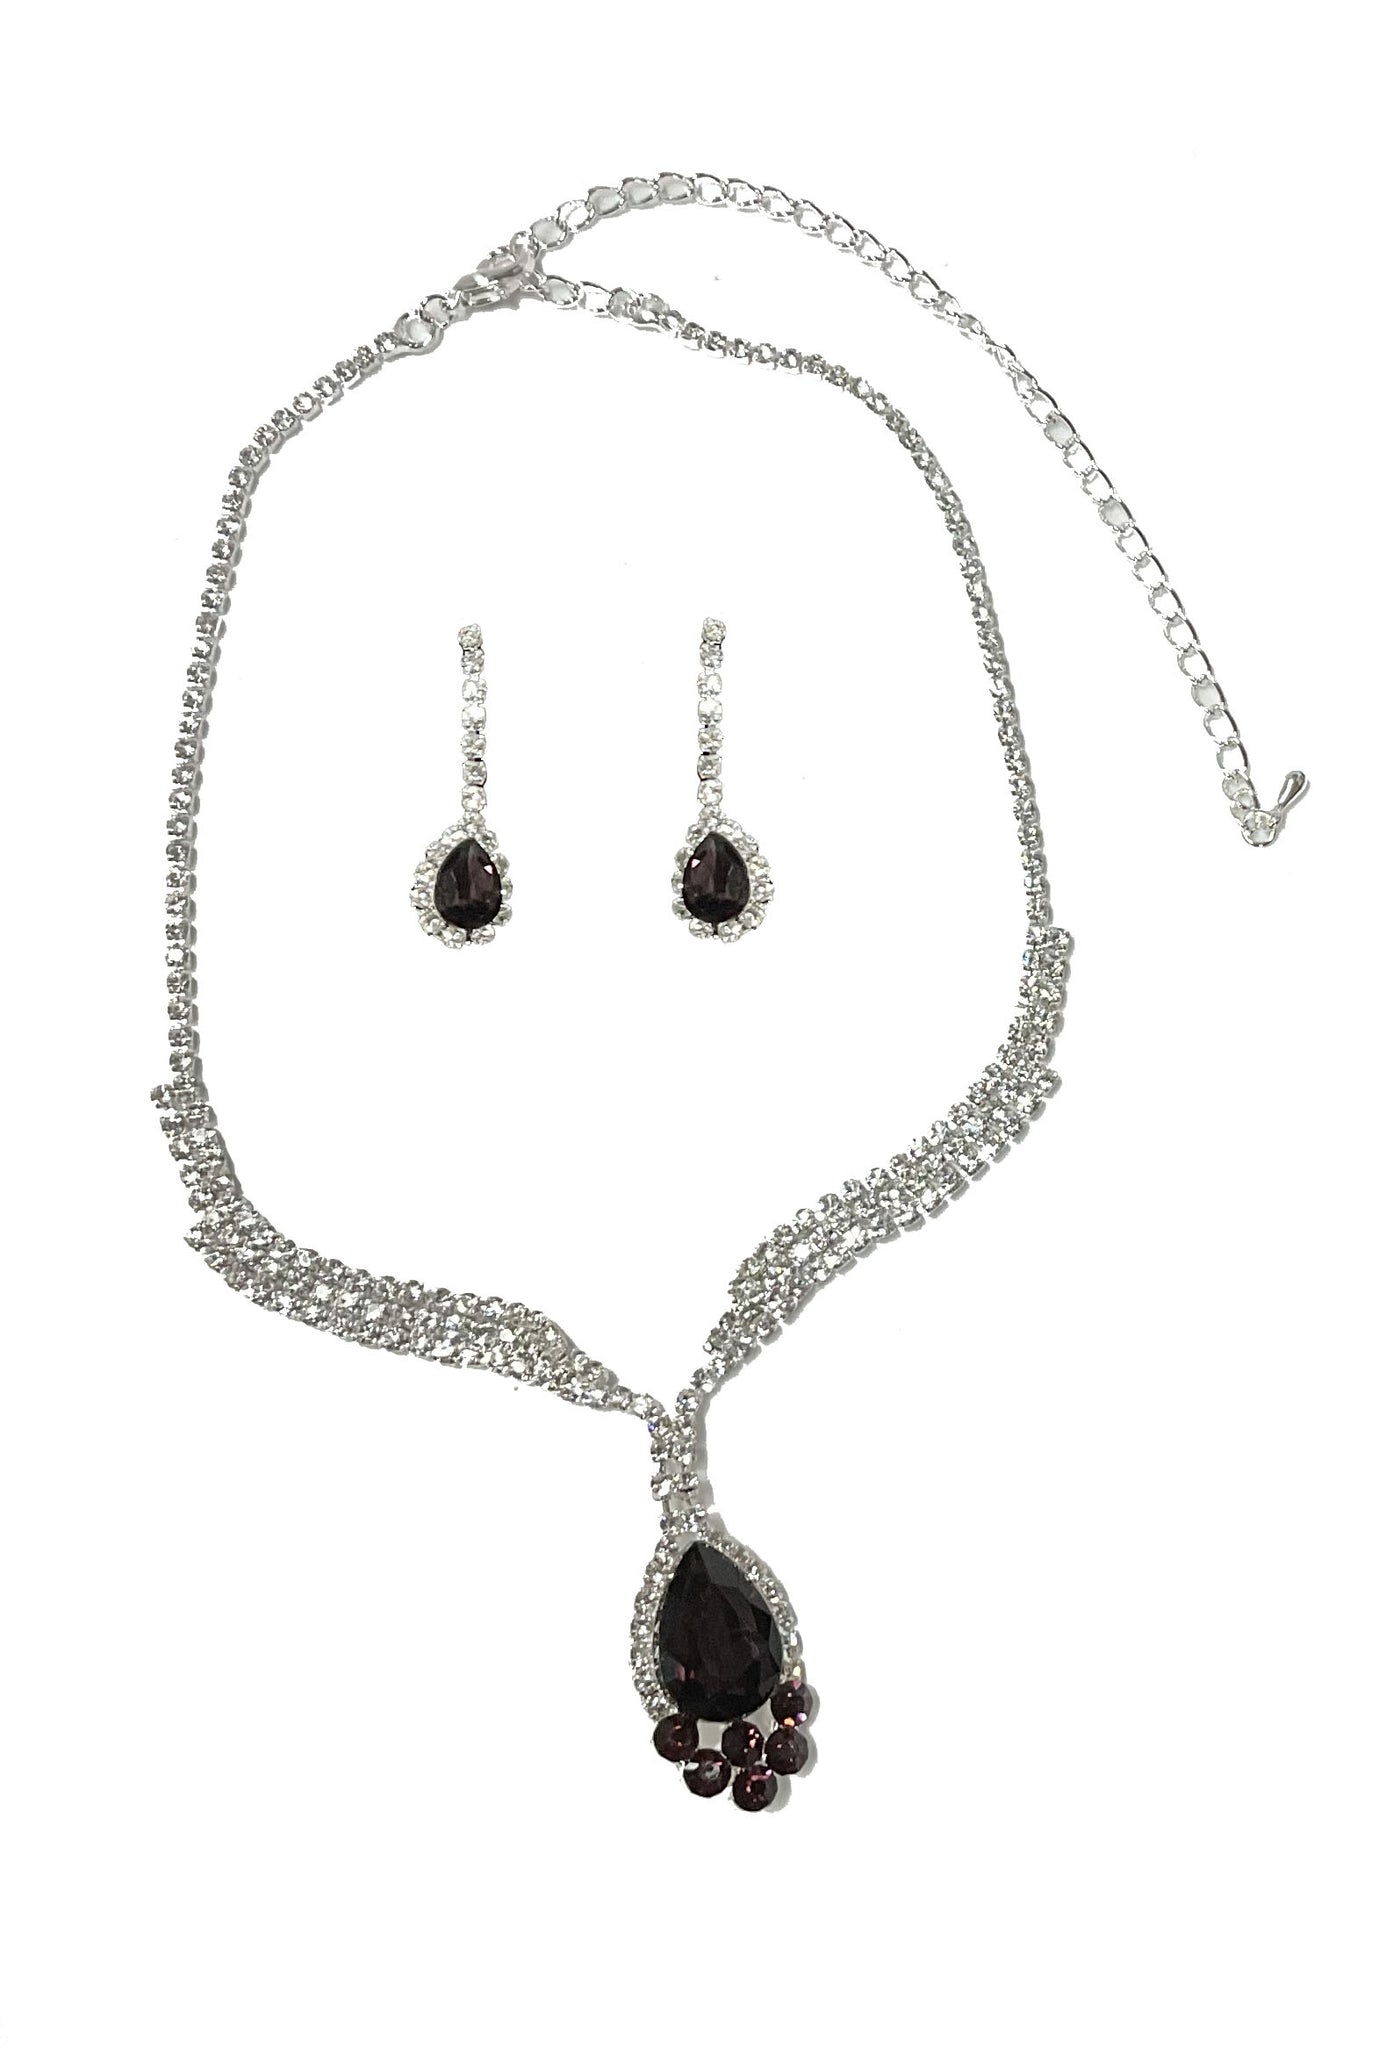 Small Rhinestone Necklace and Earrings Set#66-14113PP